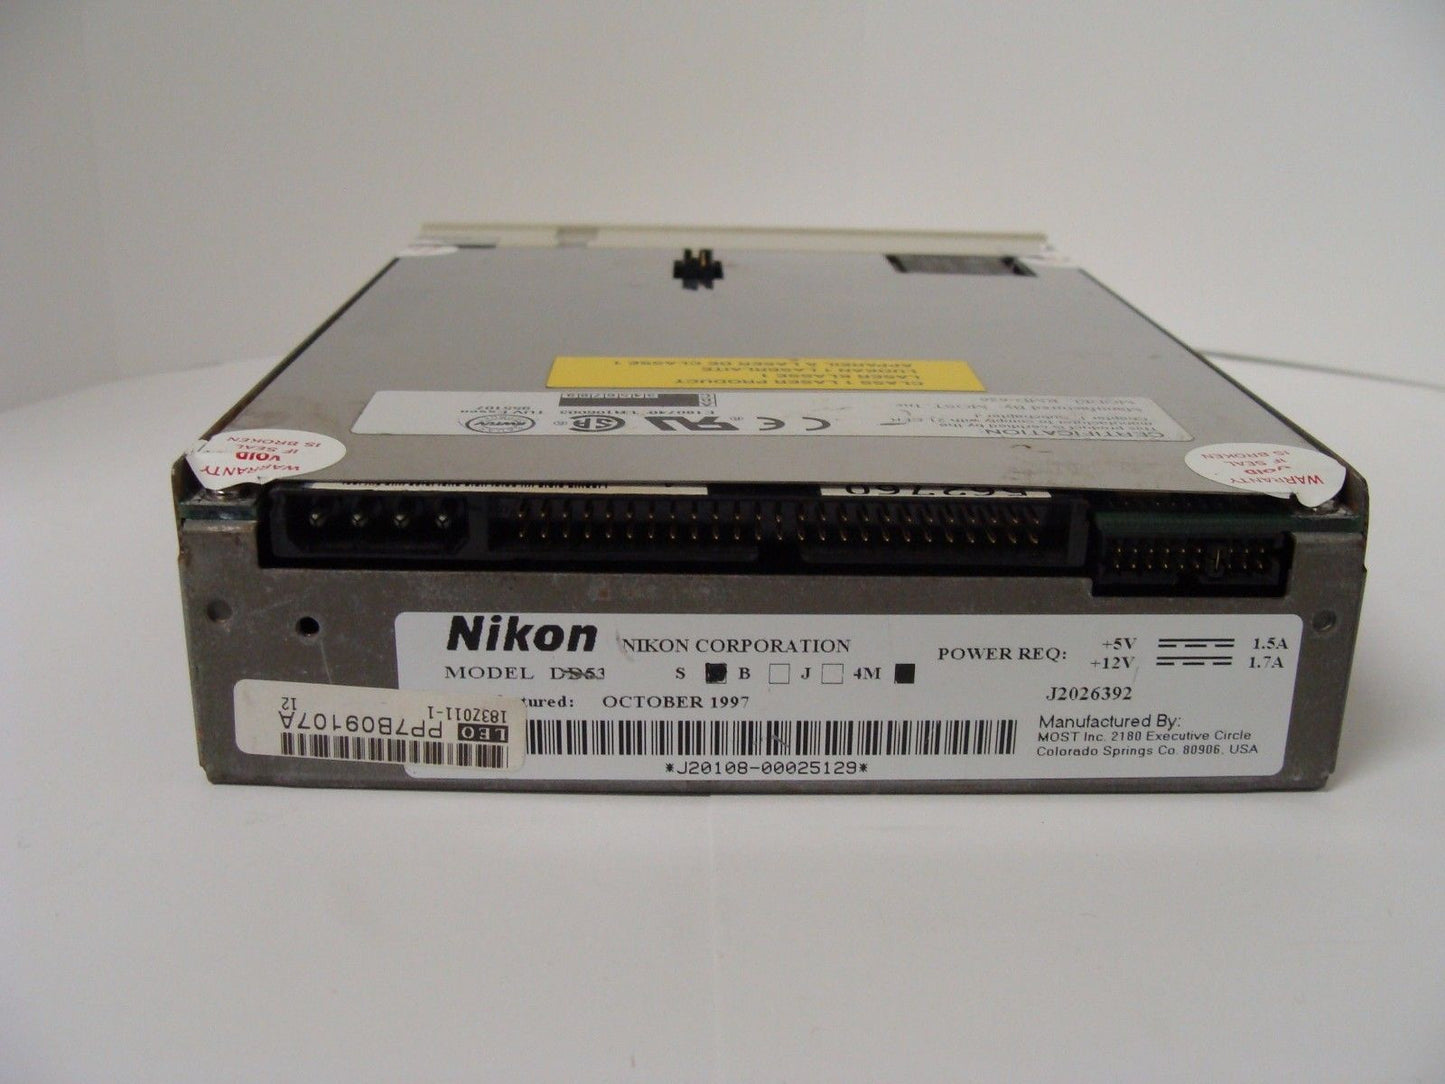 Plasmon DD53 Direct Overwrite Optical Drive SCSI 2.6gb DW260 - Micro Technologies (yourdrives.com)